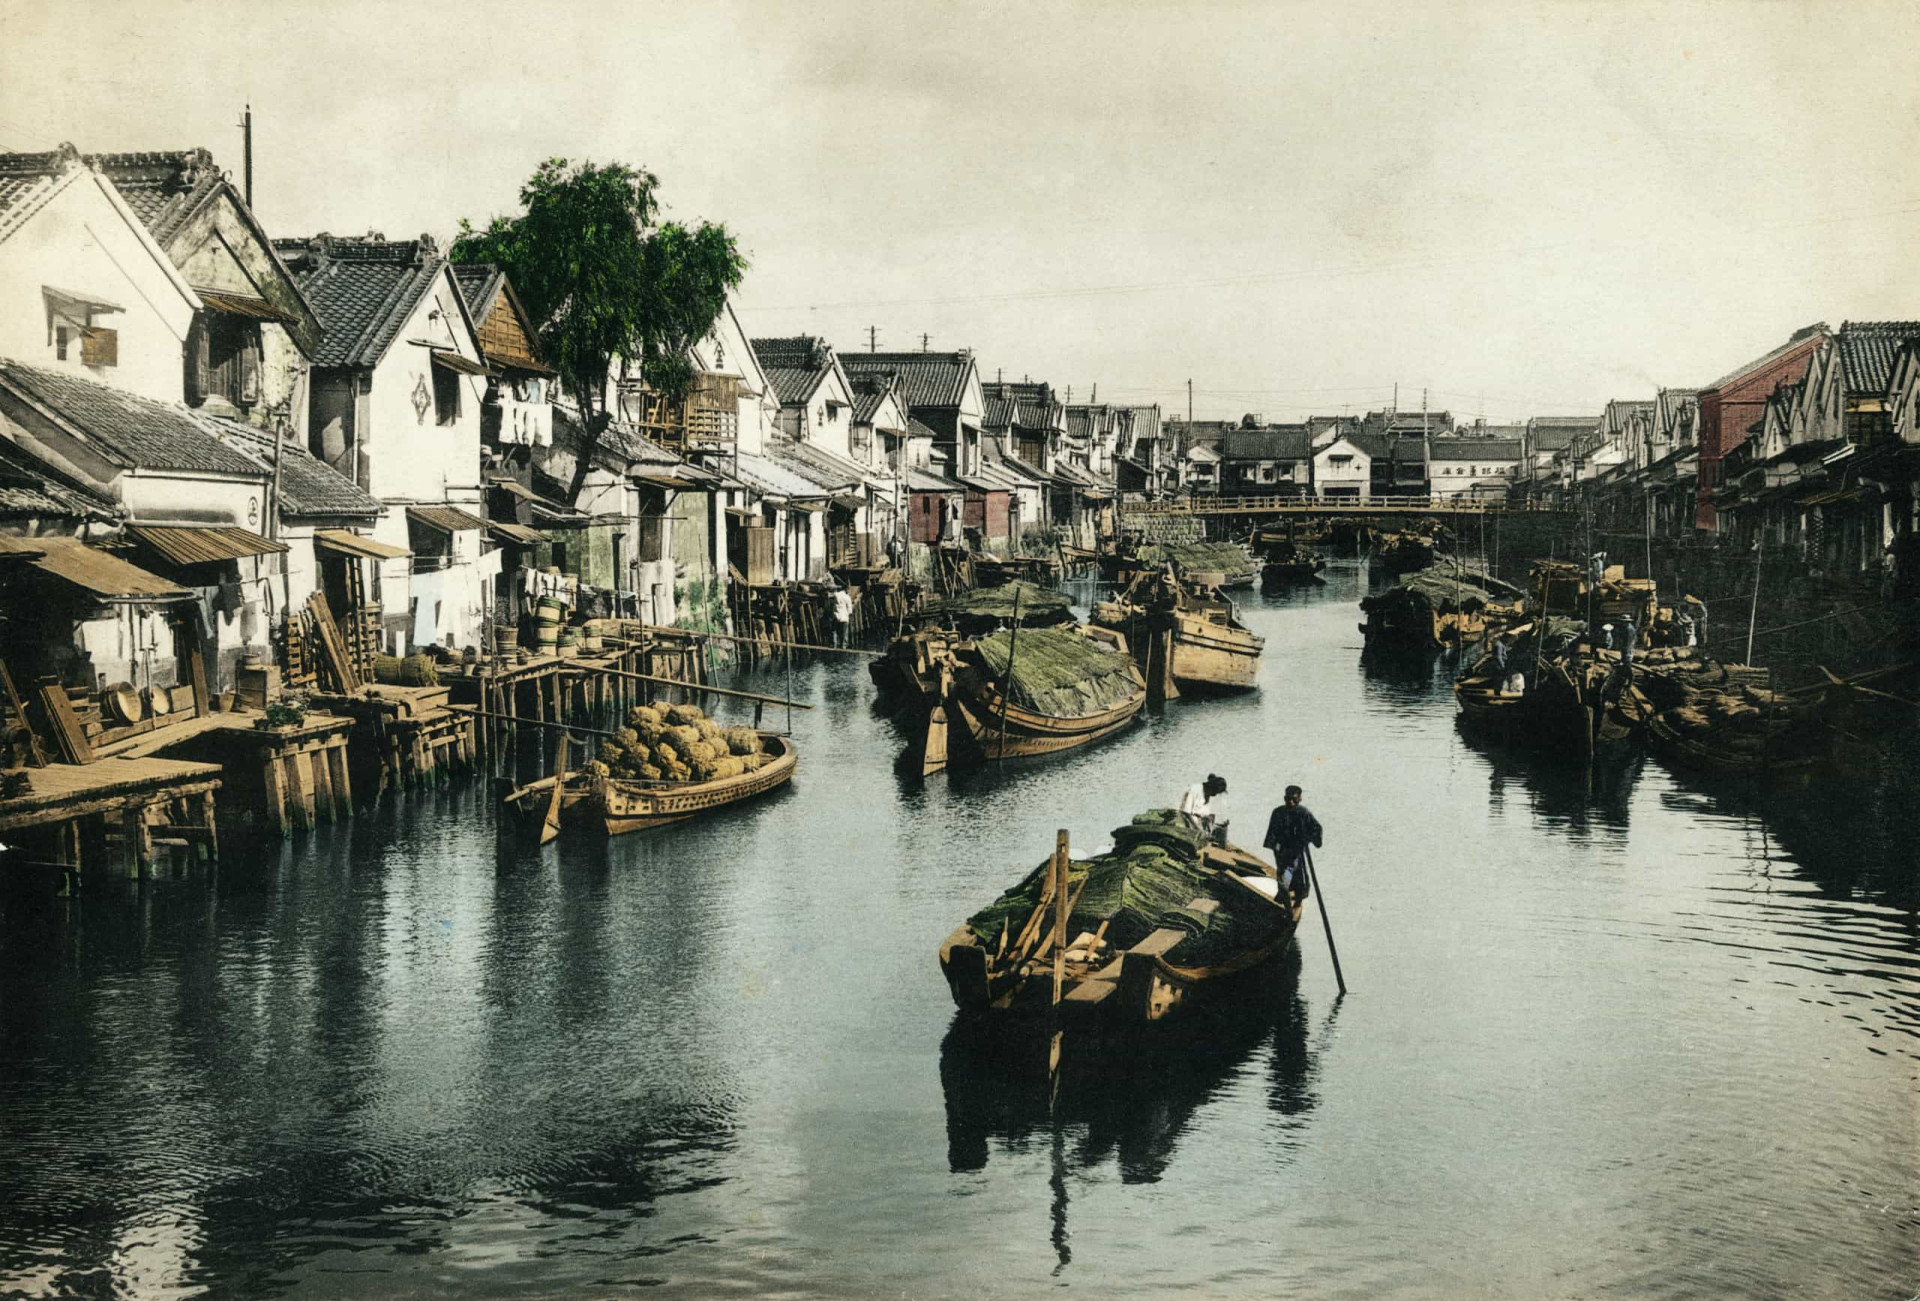 The futuristic city was once lined with canals, with barges transporting goods way back in 1880.<p>You may also like:<a href="https://www.starsinsider.com/n/358466?utm_source=msn.com&utm_medium=display&utm_campaign=referral_description&utm_content=397441v1en-en"> Sports stars you didn't know had medical conditions</a></p>